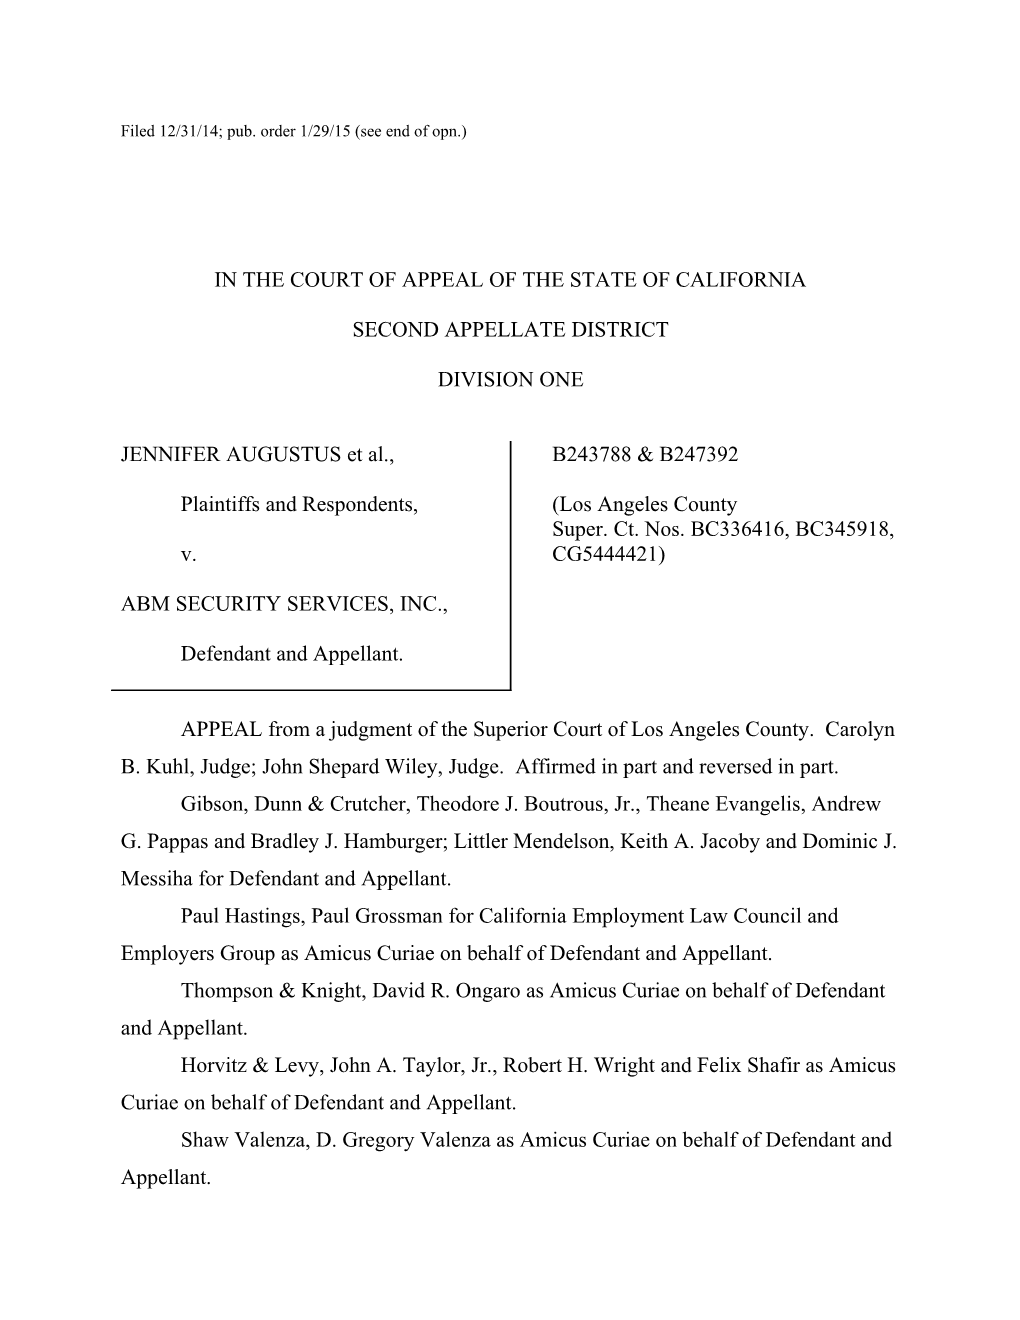 Filed 12/31/14; Pub. Order 1/29/15 (See End of Opn.)